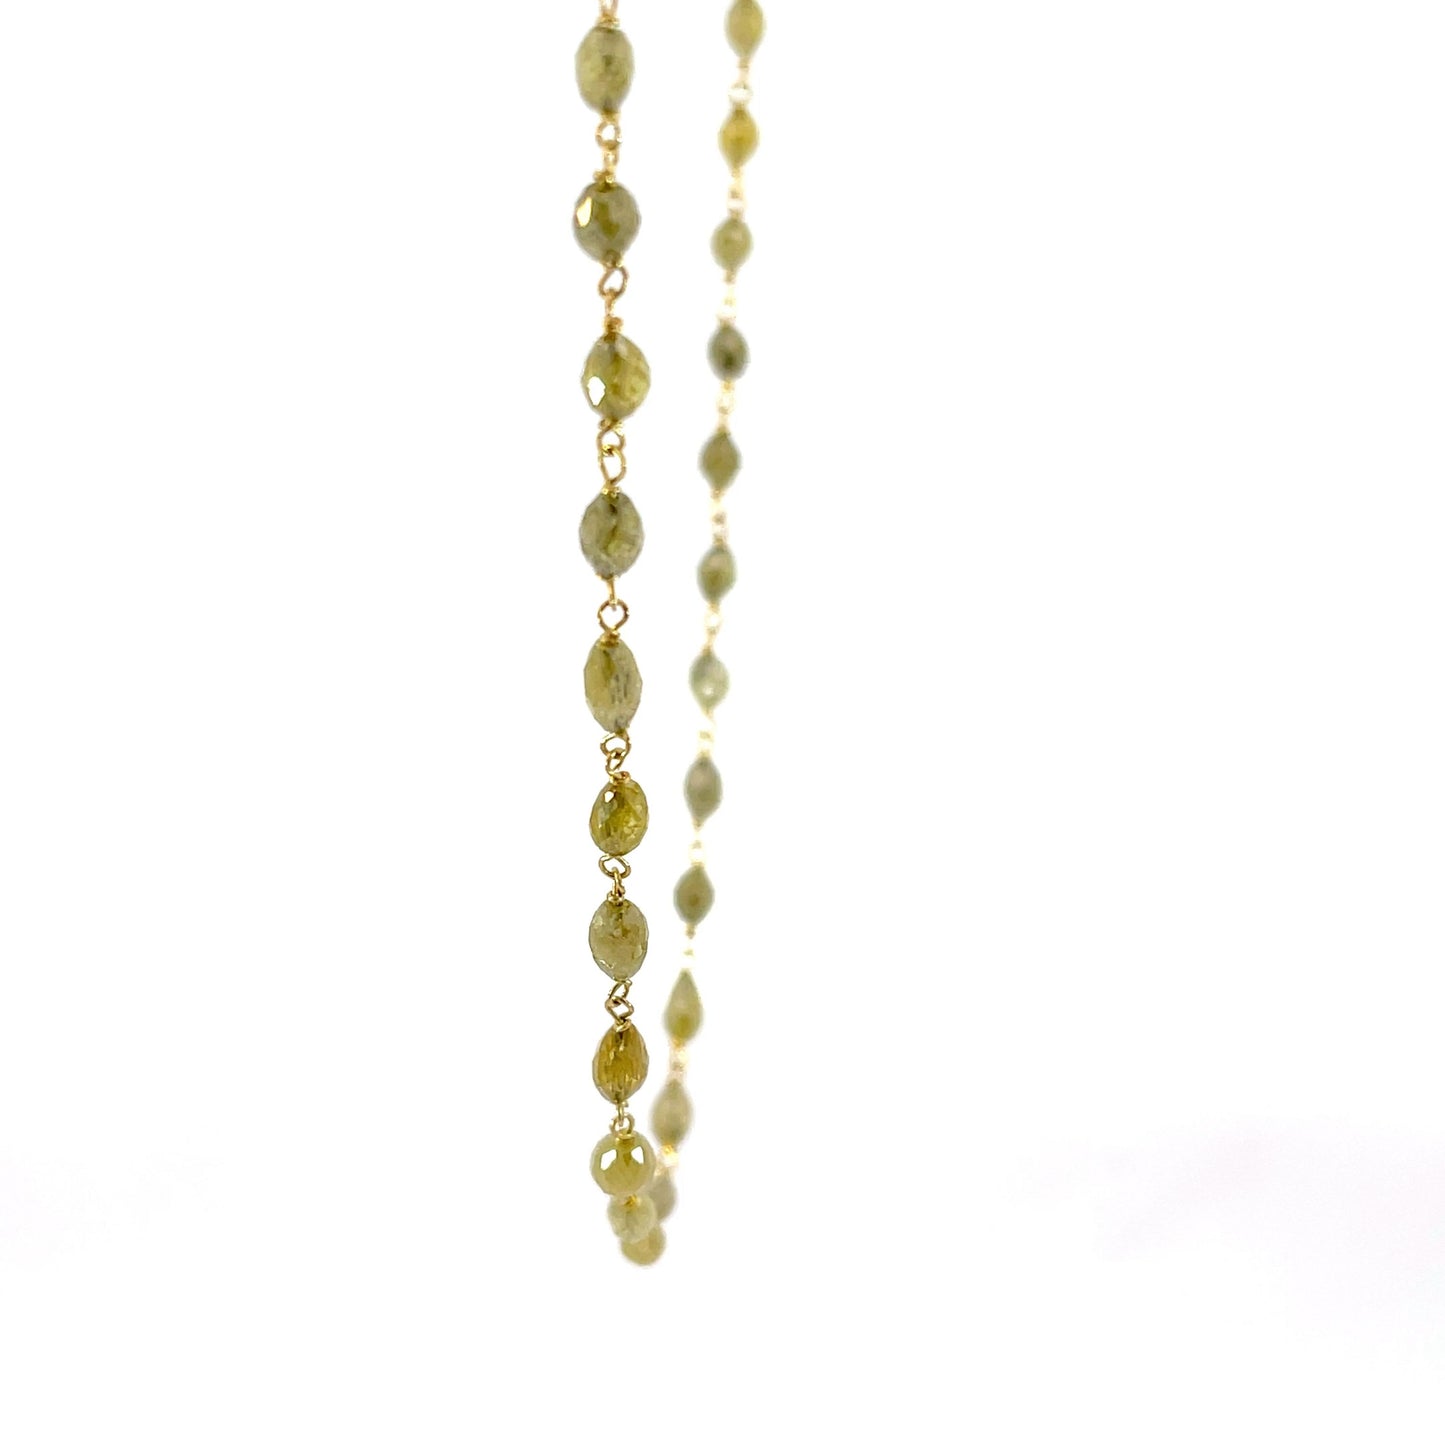 24" Yellow Gold and Yellow Diamond Bead Necklace